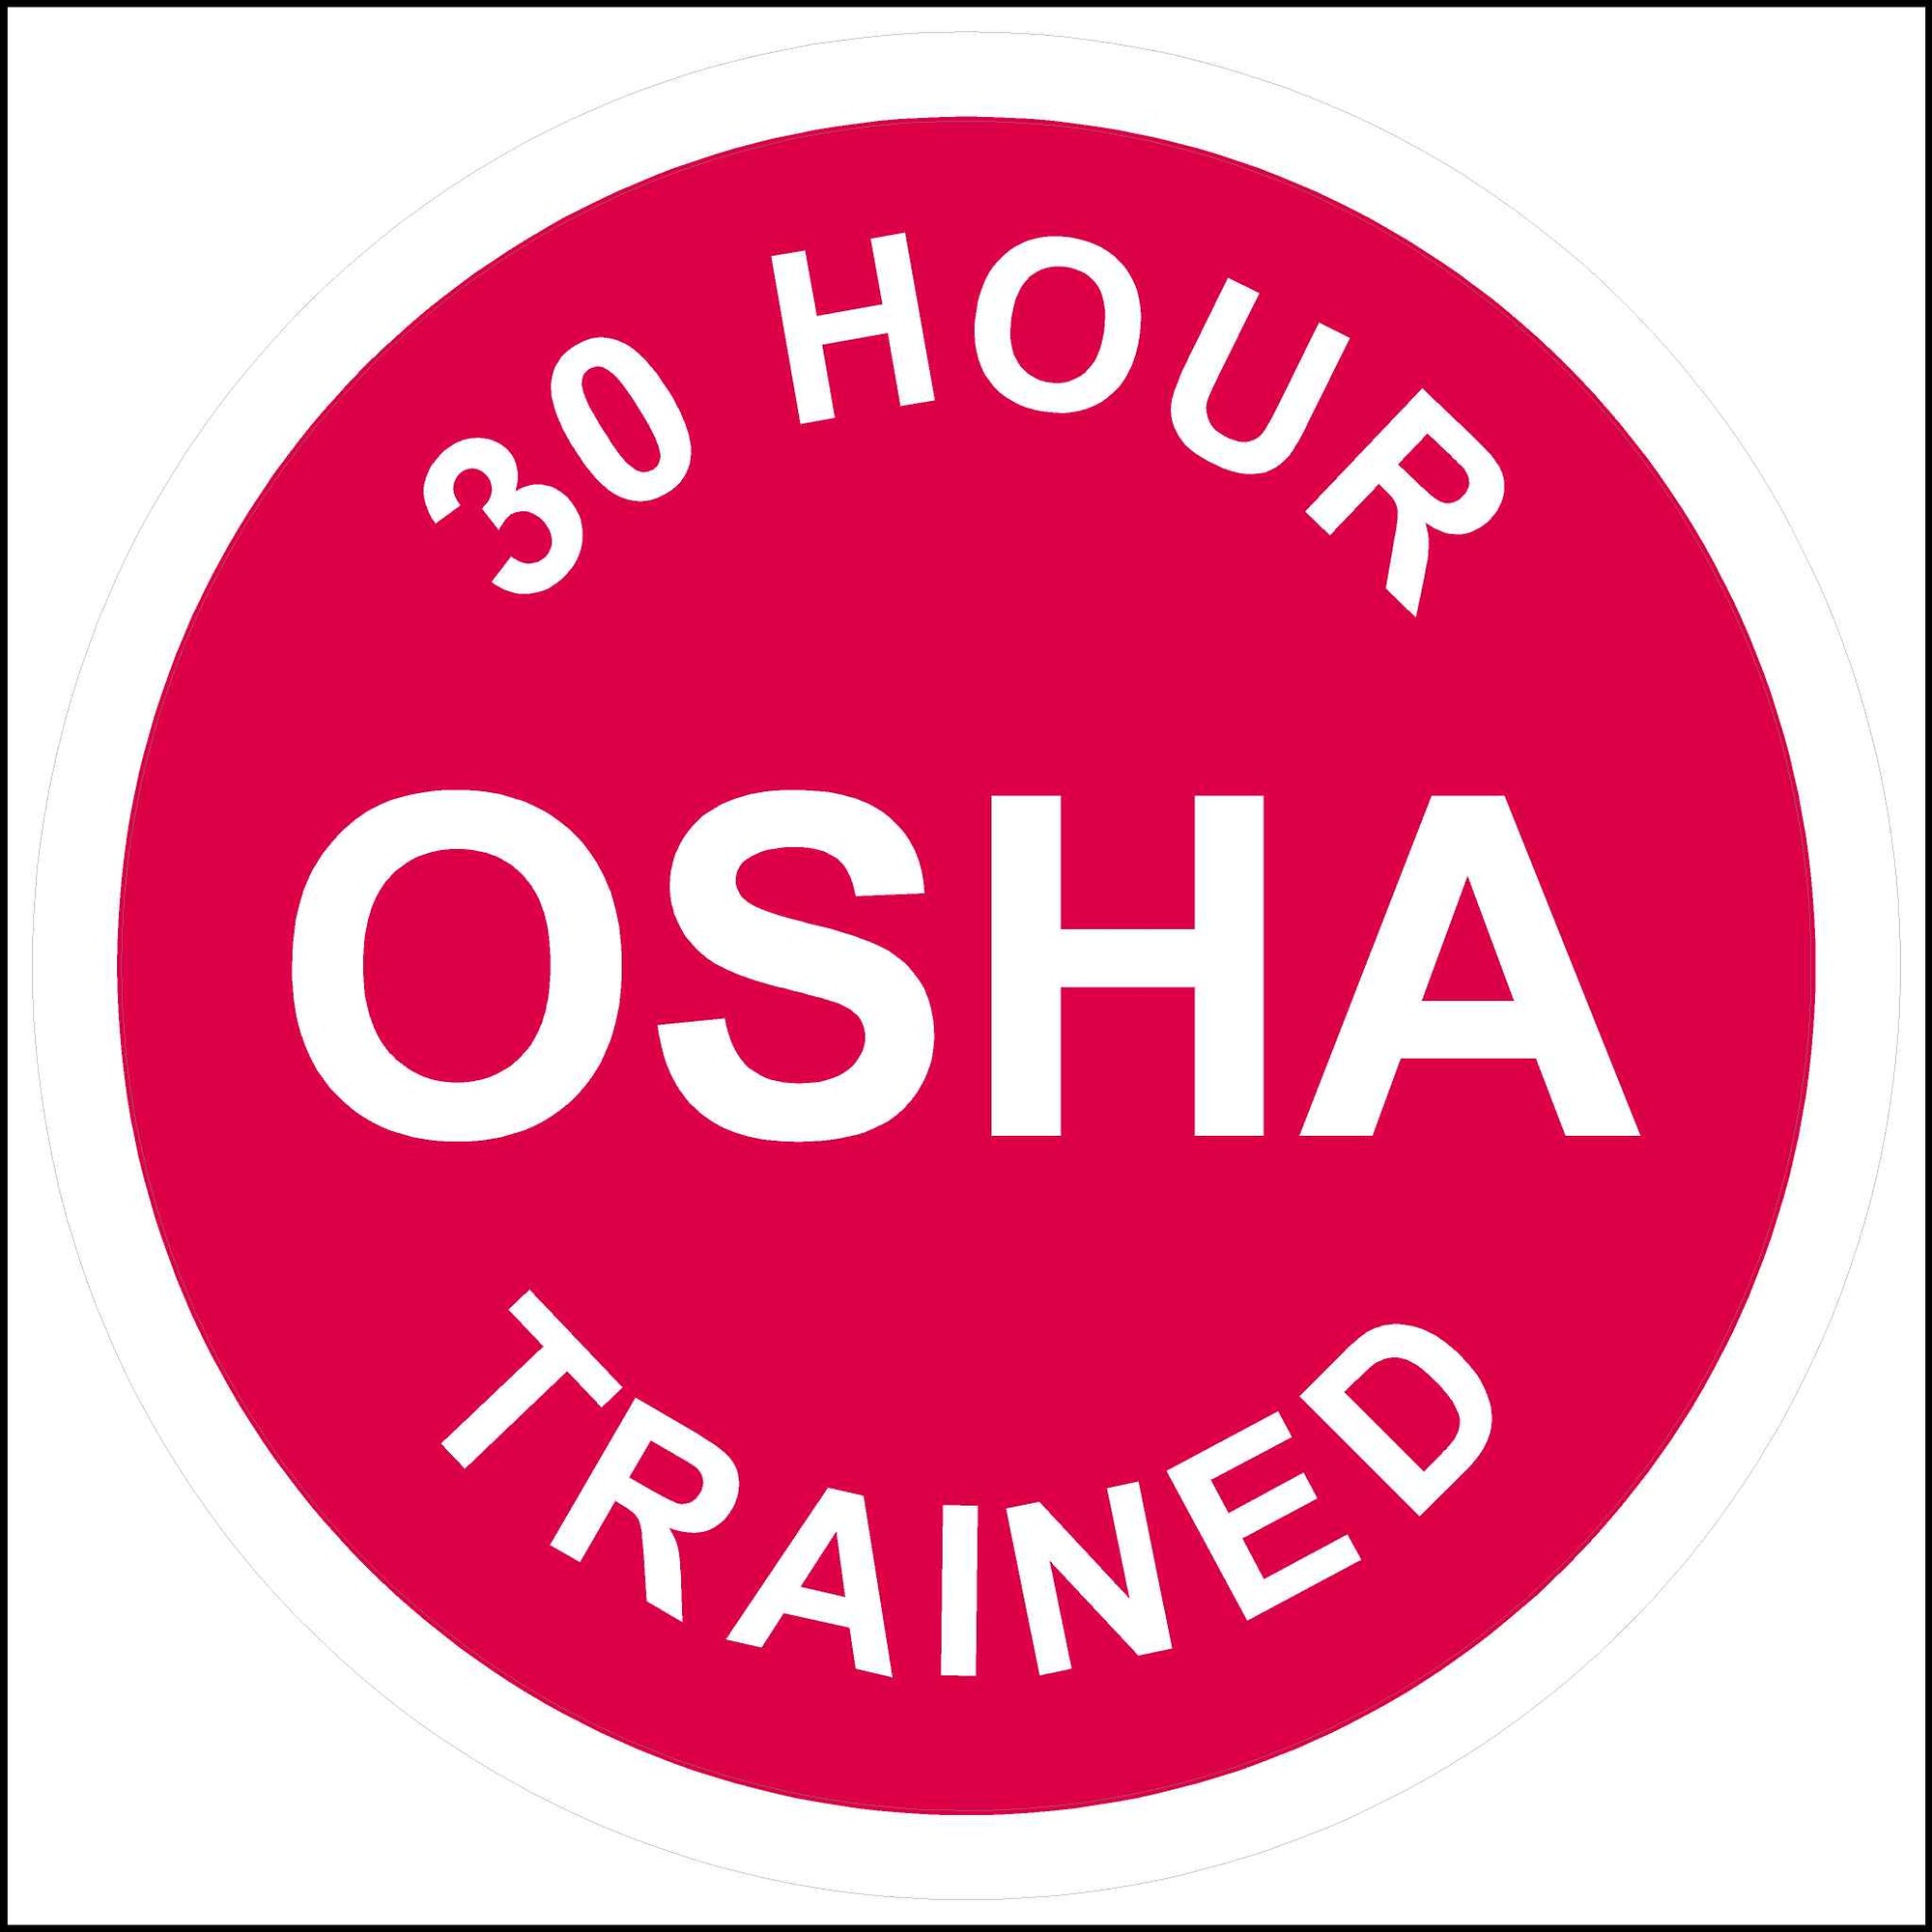 30 Hour OSHA Trained Hard Hat Sticker printed in white letters on red background.